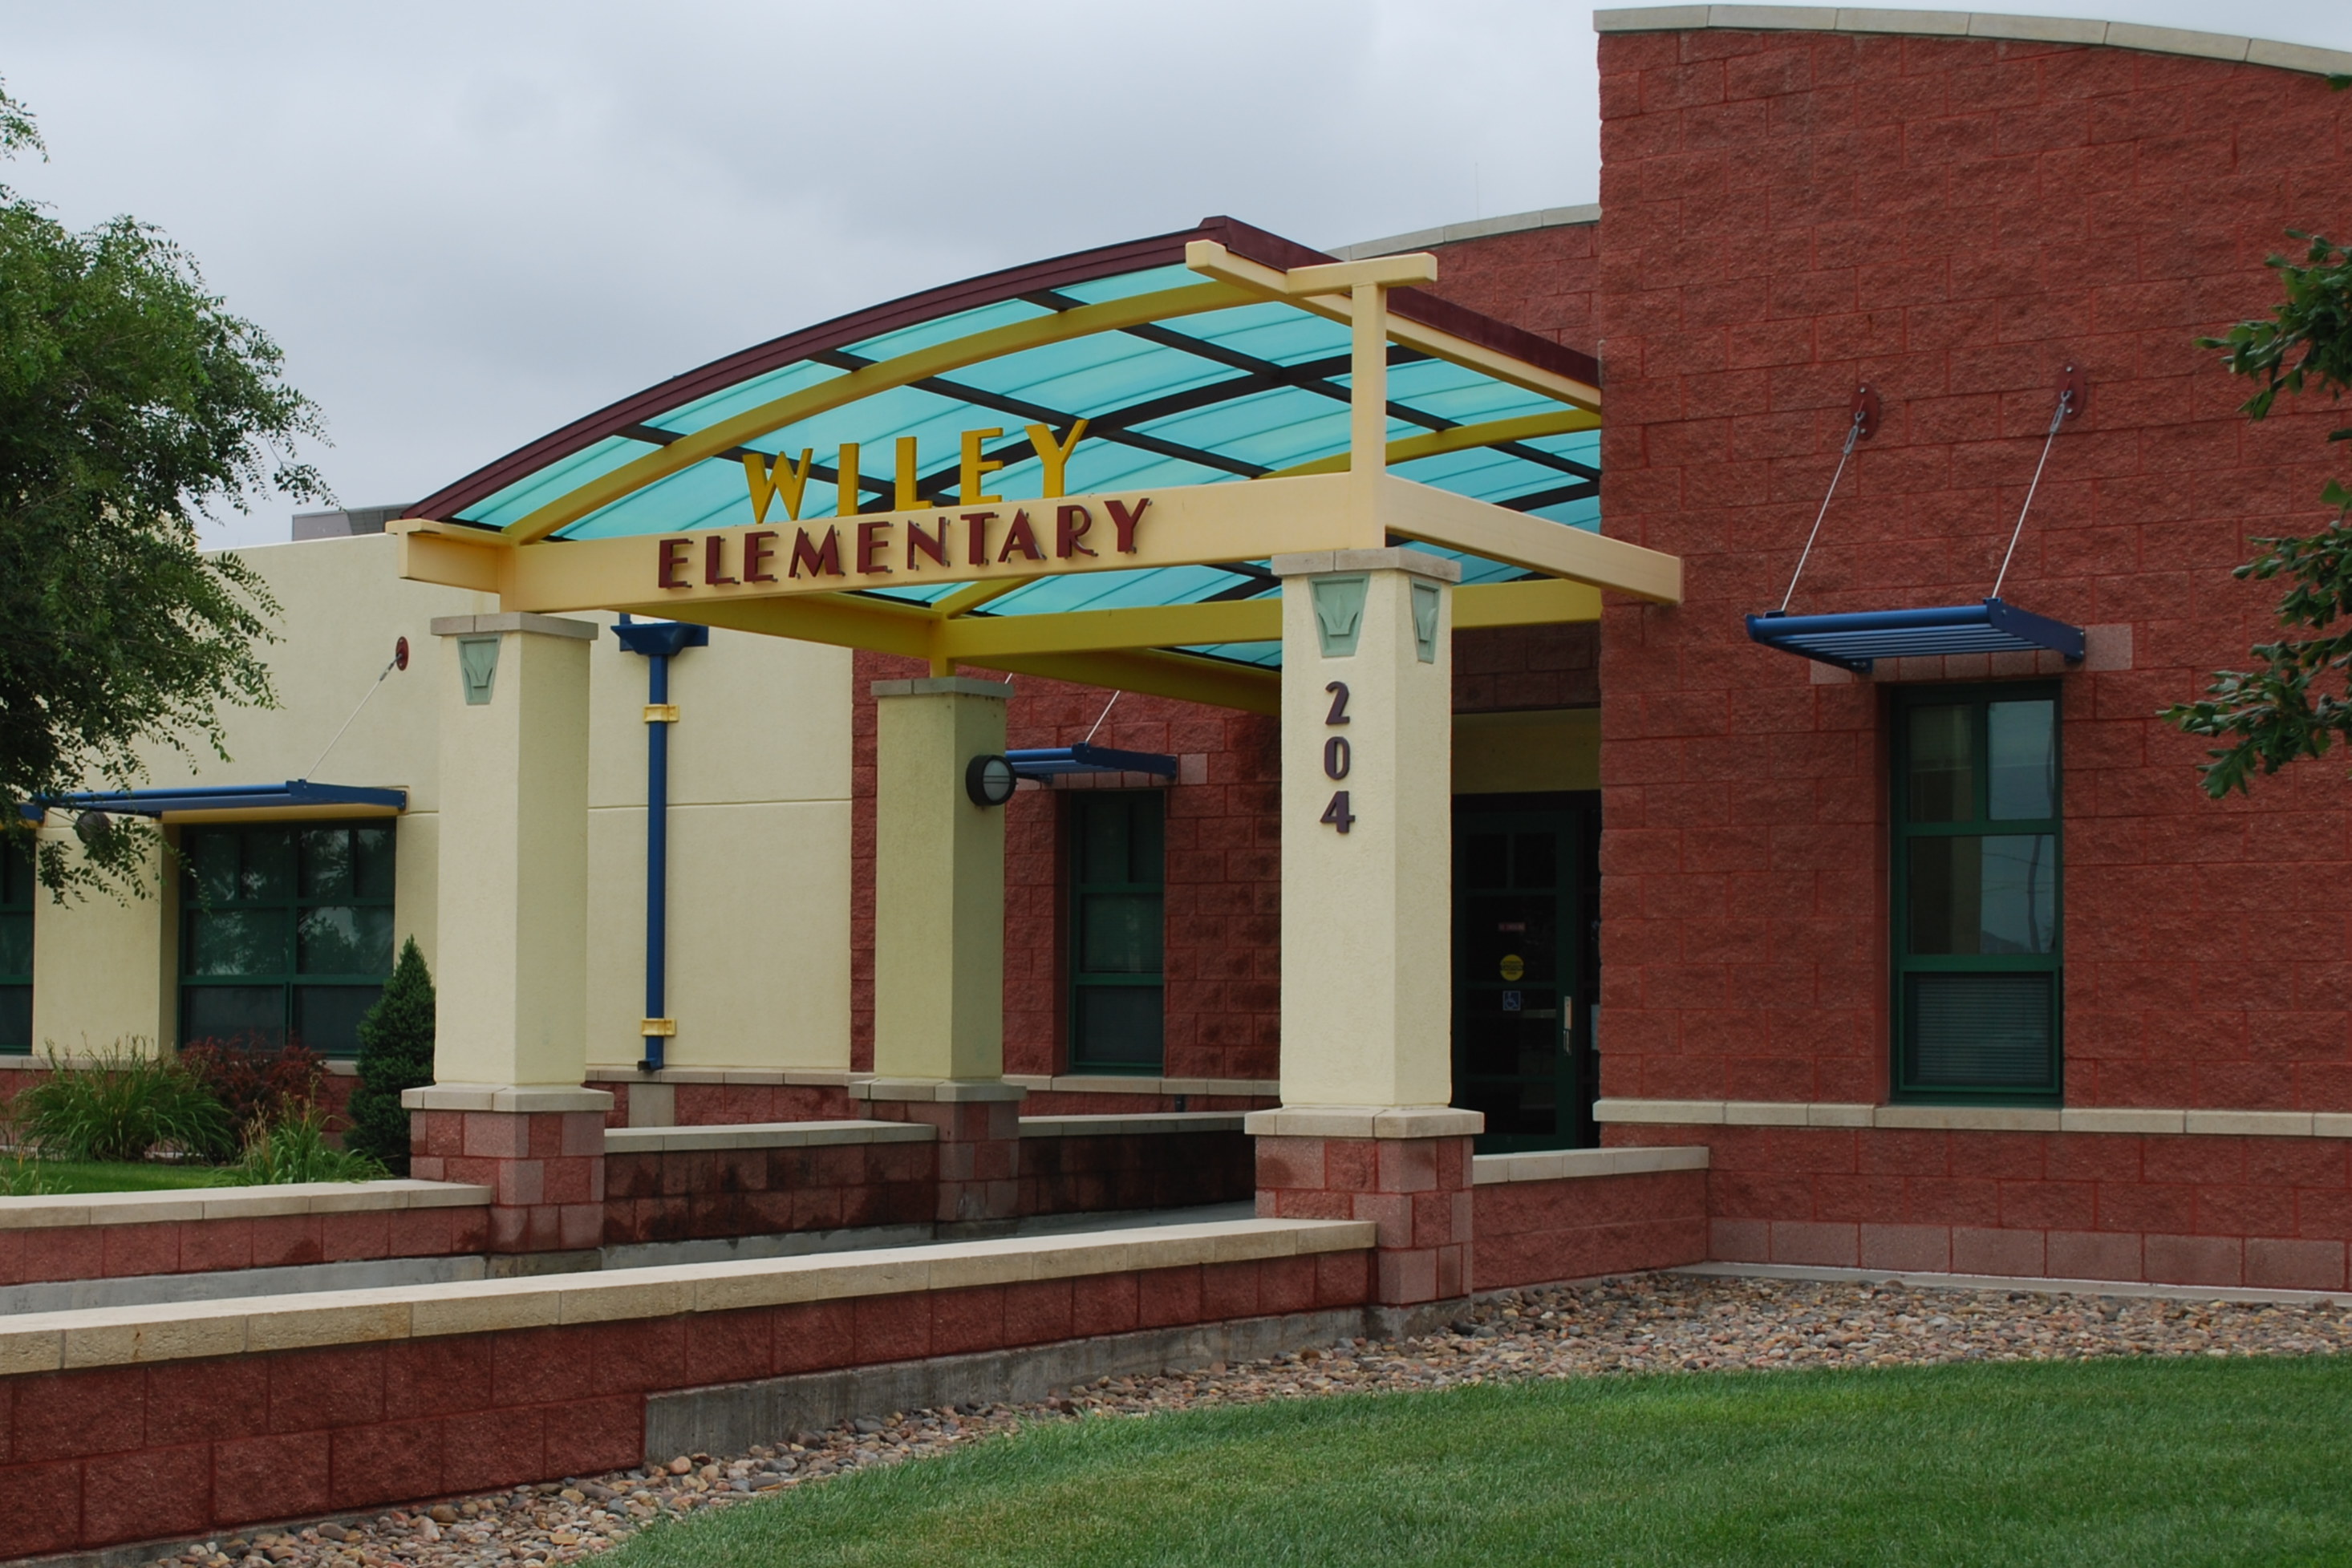 Wiley Elementary Building